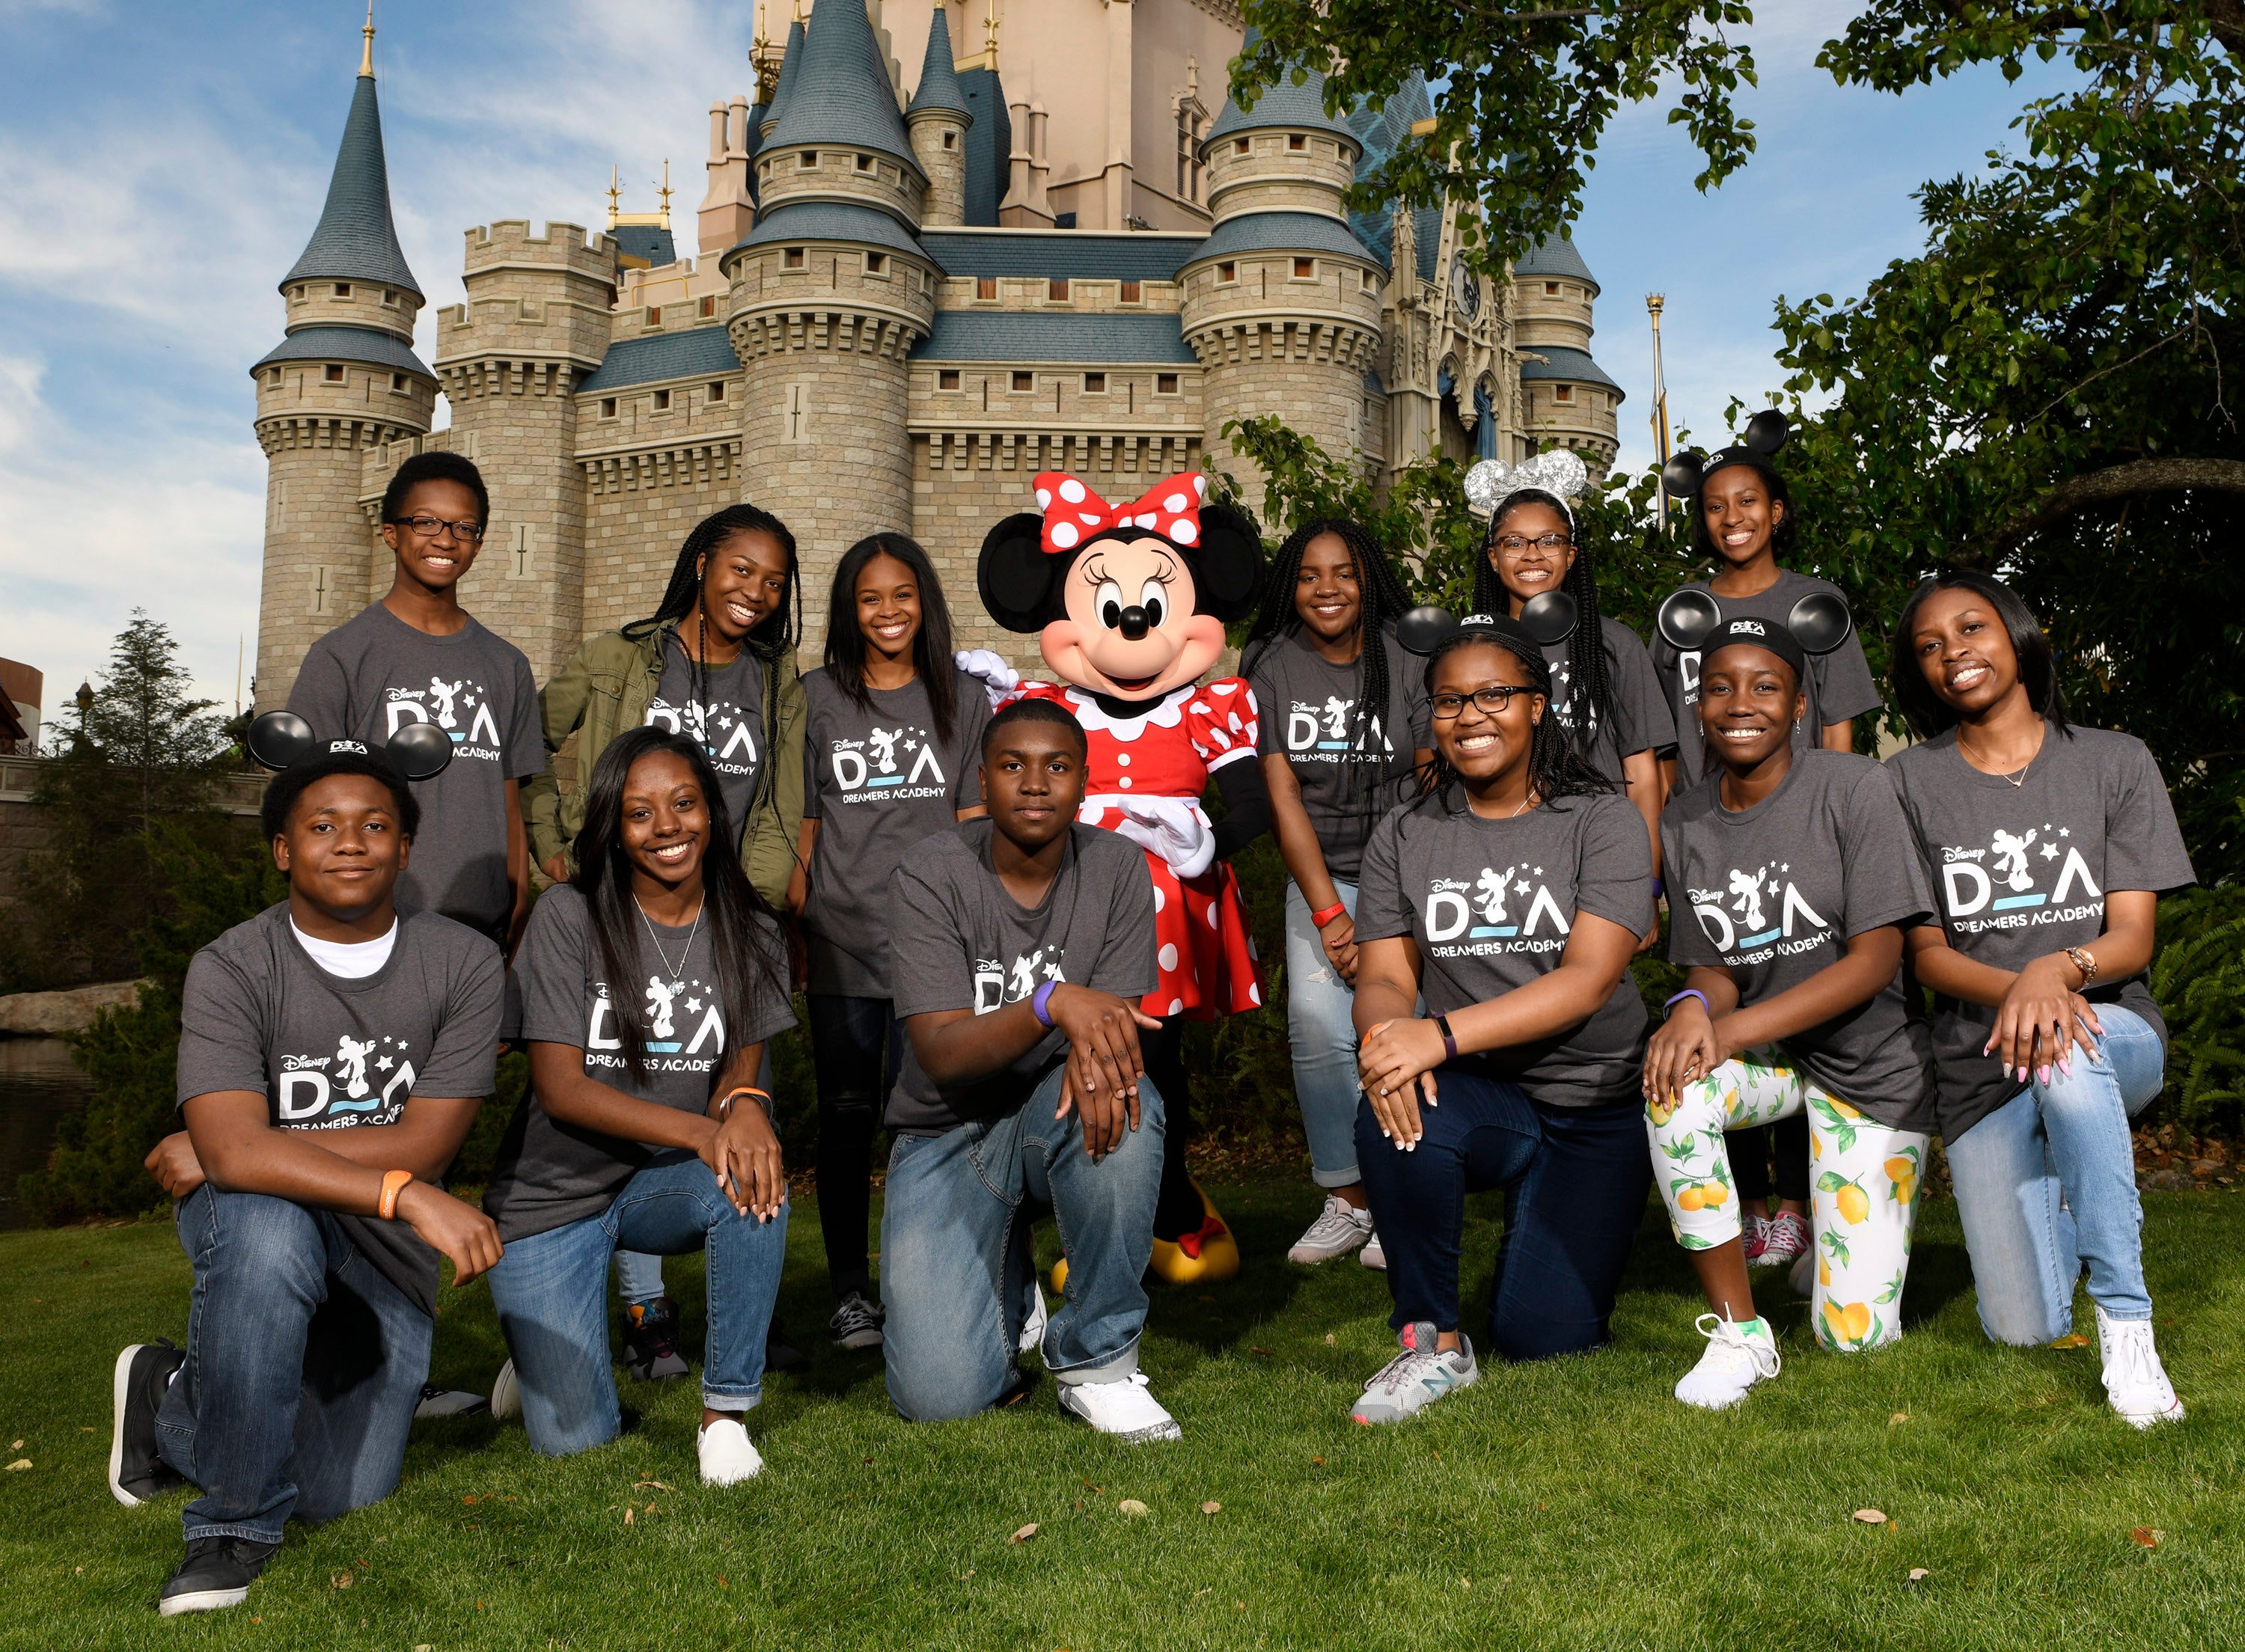 Support The Future Game-Changer In Your Life! Last Call For 2019 Disney Dreamers Academy High School Applicants